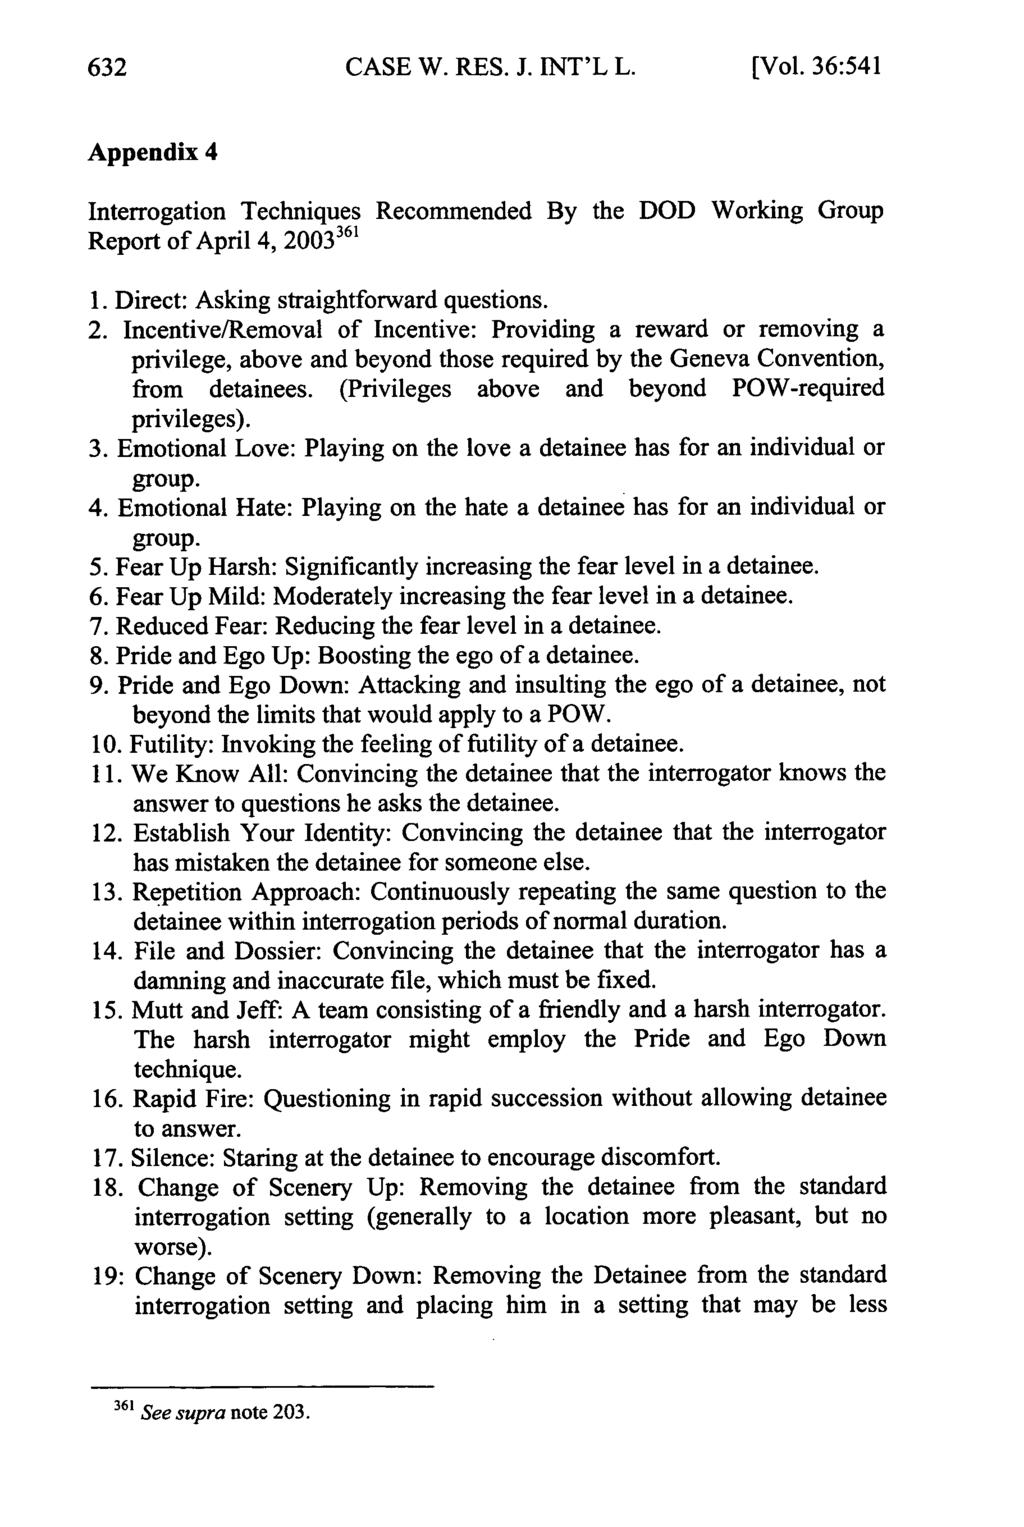 CASE W. RES. J. INT'L L. [Vol. 36:541 Appendix 4 Interrogation Techniques Recommended By the DOD Working Group Report of April 4, 20